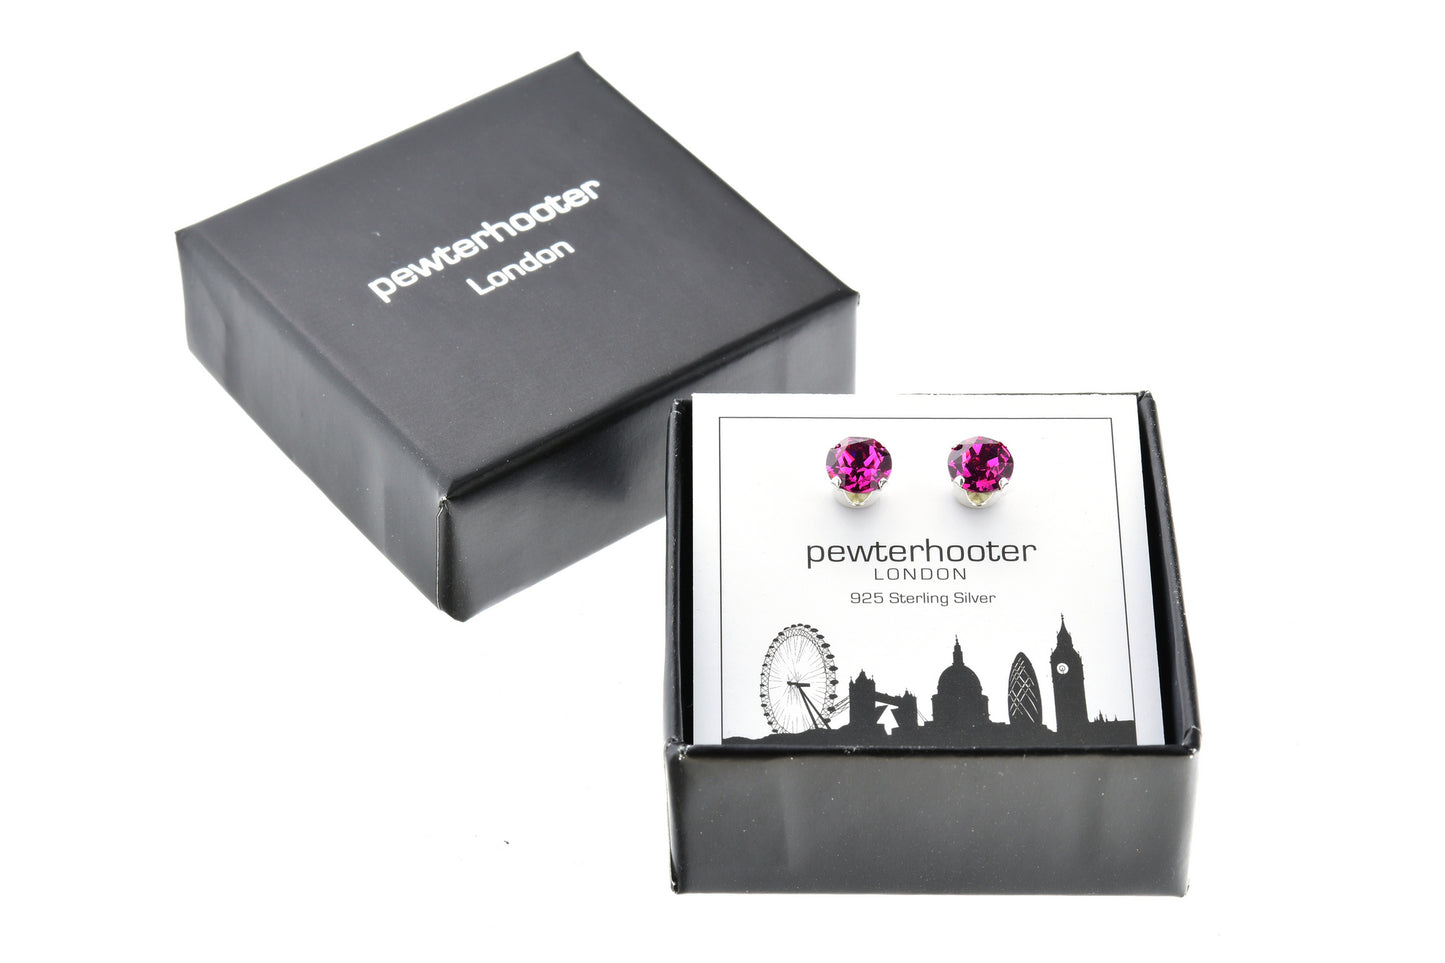 pewterhooter® Women's Classic Collection 925 Sterling silver earrings with sparkling Fuchsia crystals, packaged in a gift box for any occasion.